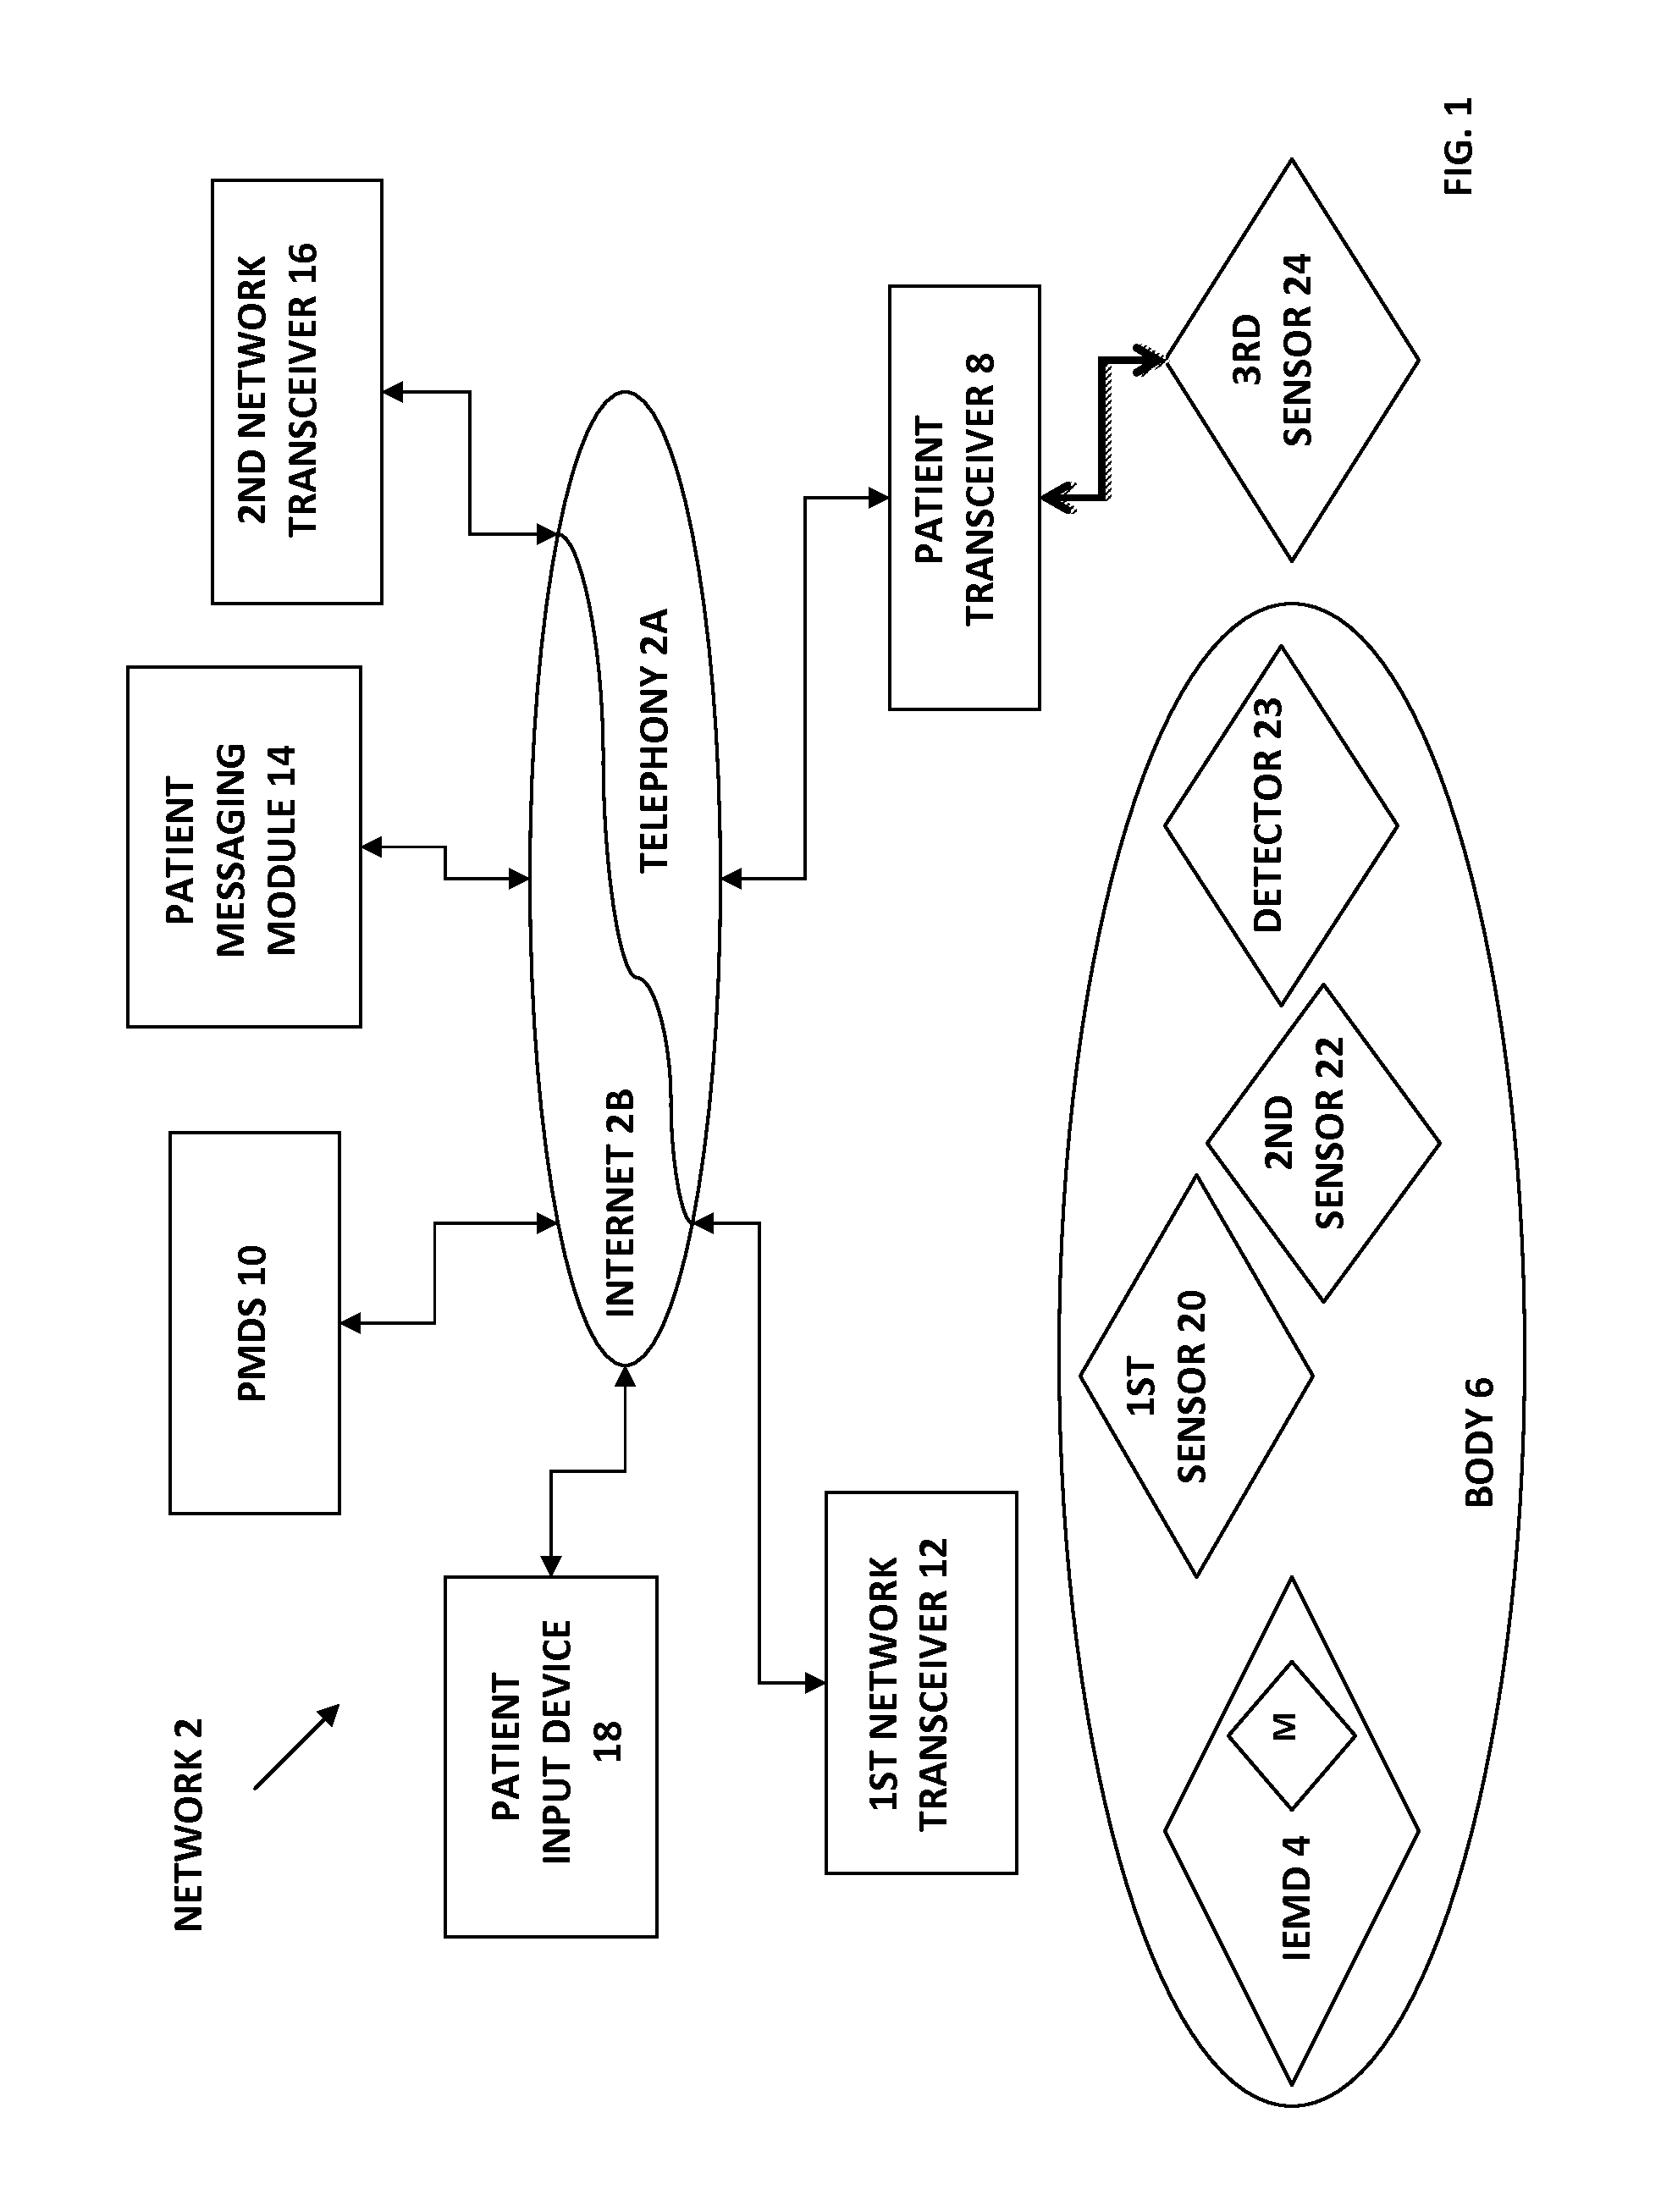 Ingestion-Related Biofeedback and Personalized Medical Therapy Method and System